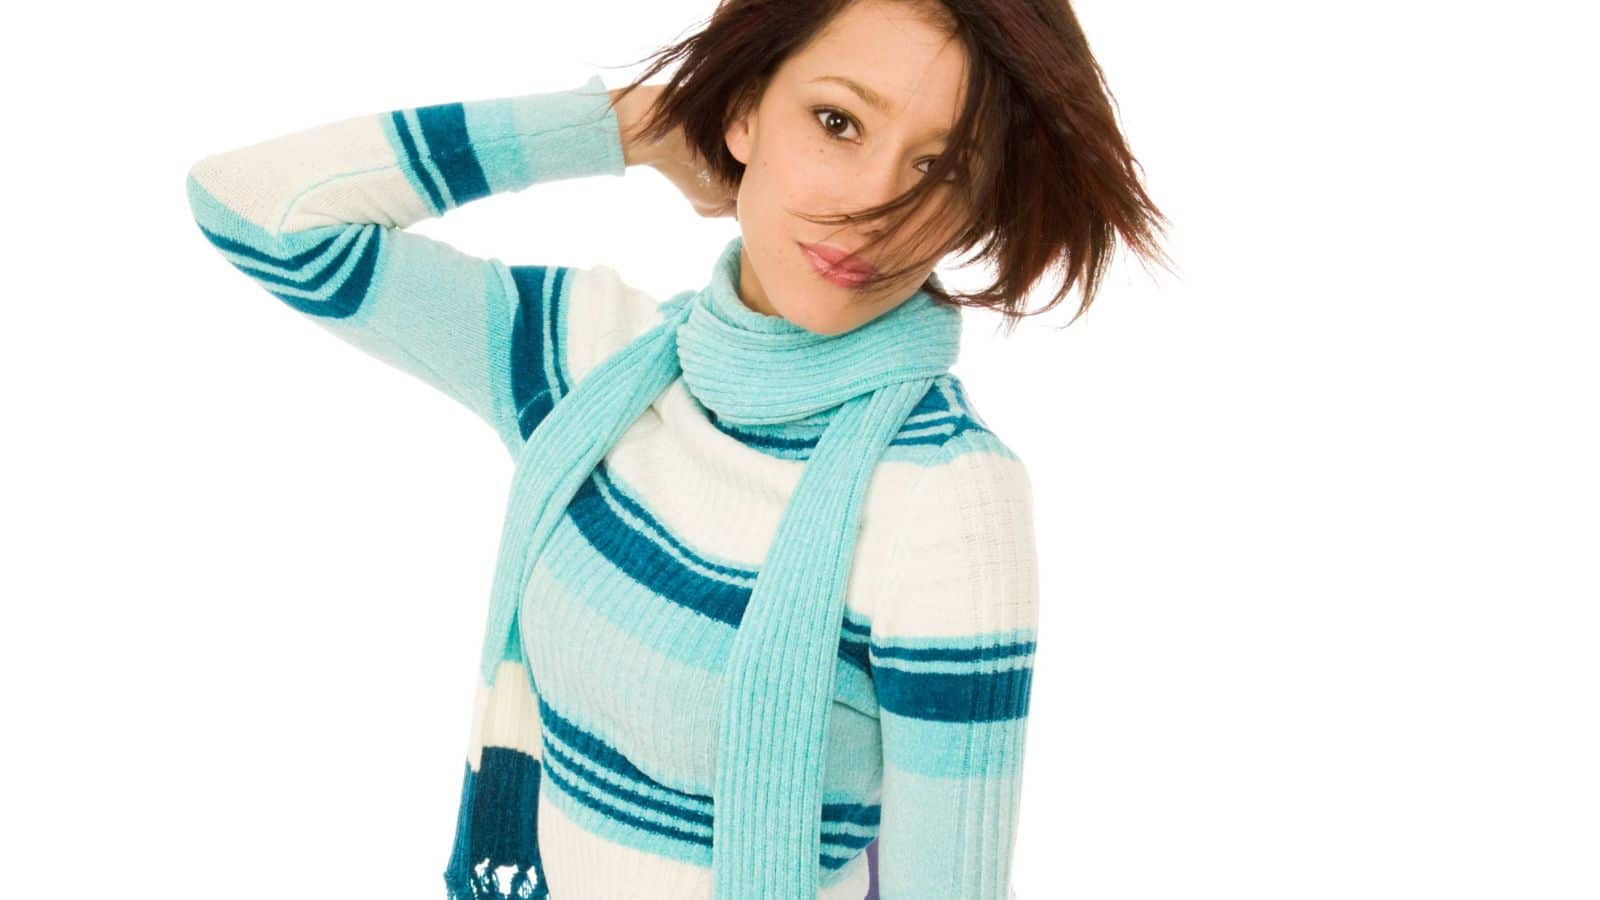 Beautiful young model with blue scarf and wintry sweater, holding a light lavender flowing fabric blowing in the wind.